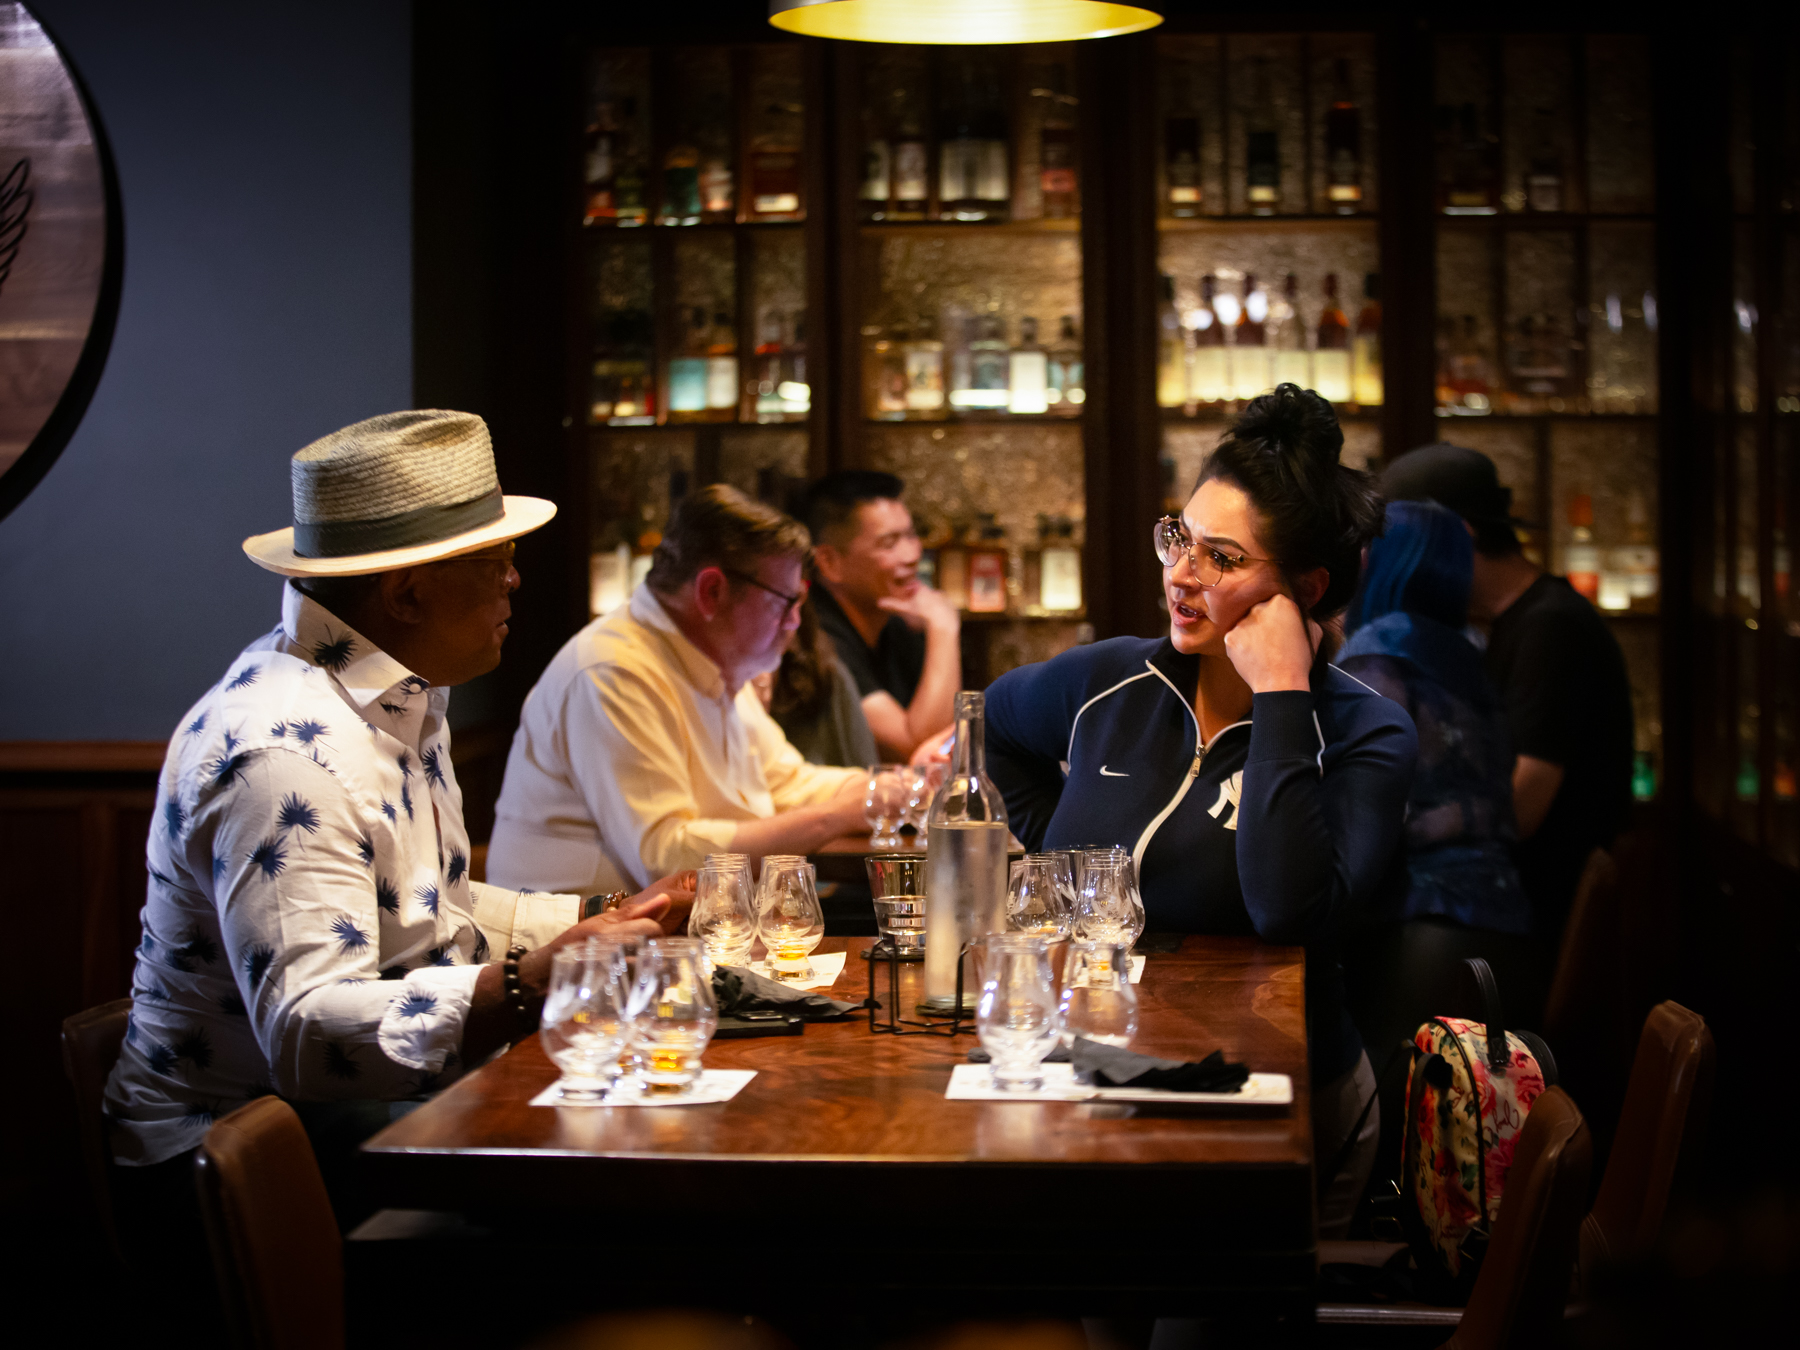 Customers sit around a table talking about the Whiskey they are tasting.  Whiskey bottles on shelves can be seen in the background